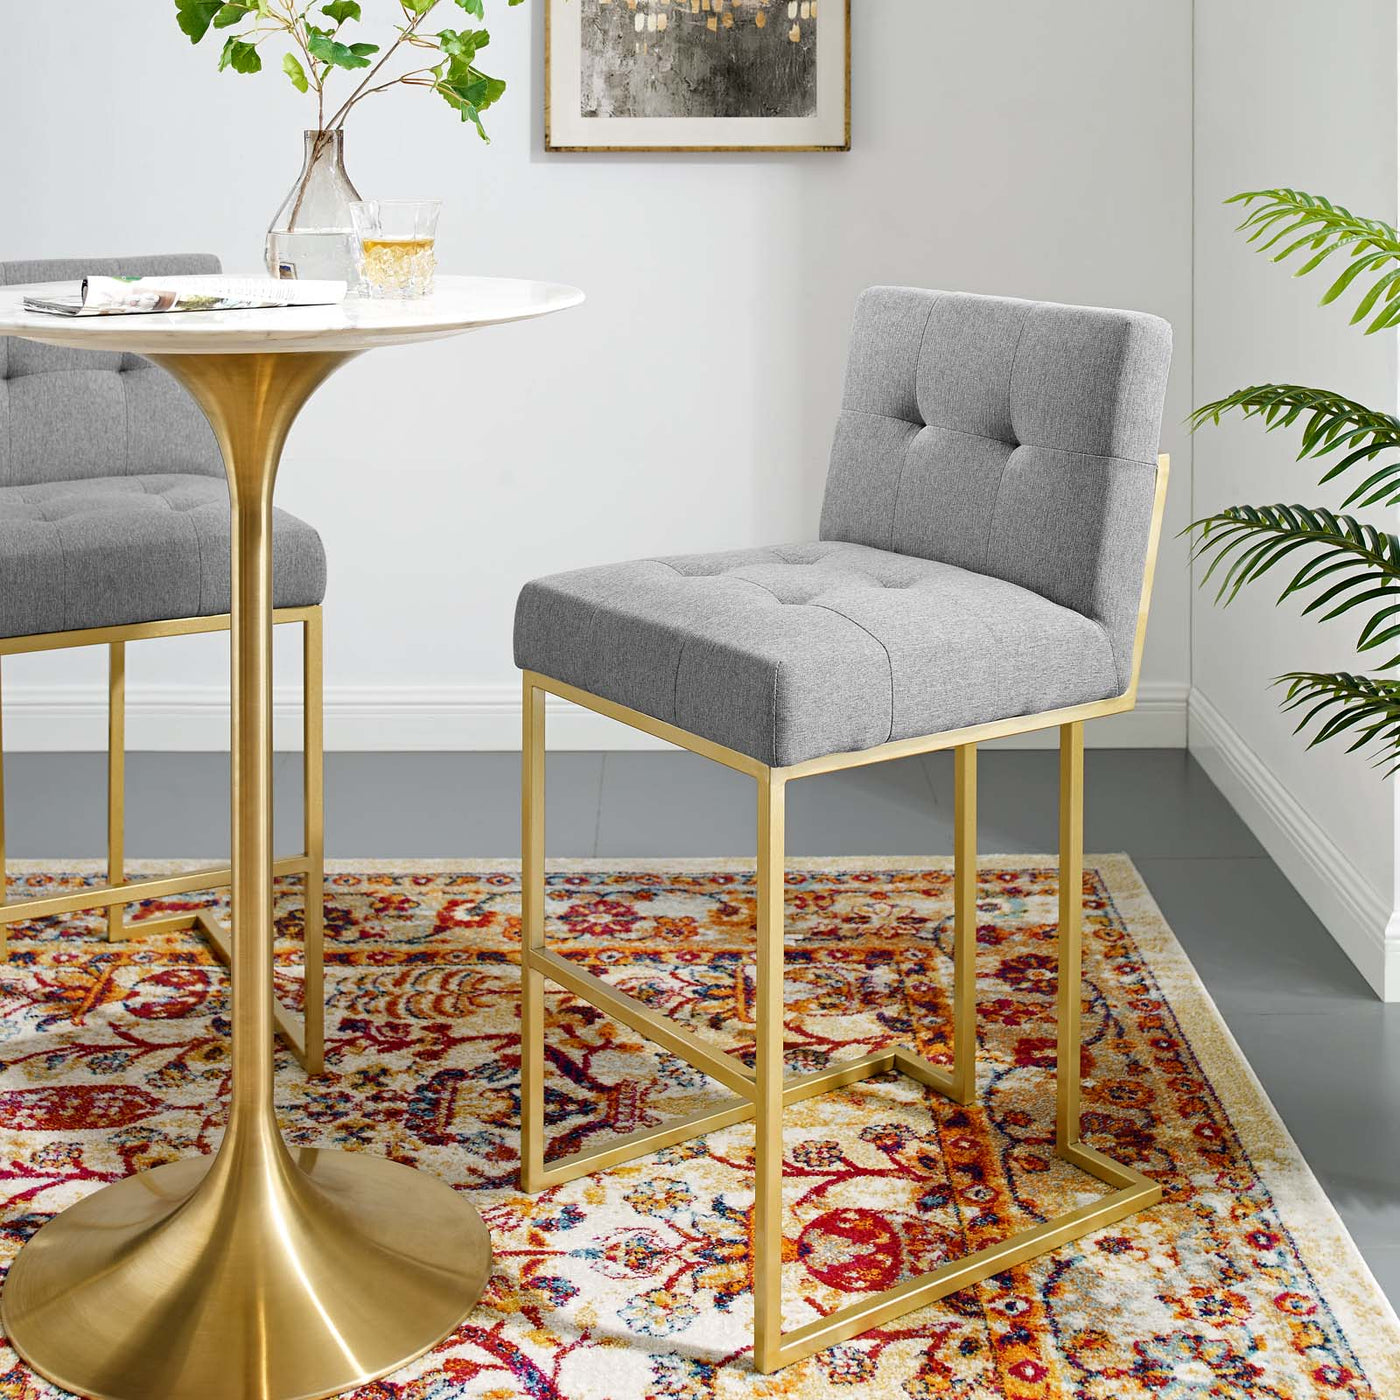 Privy Gold Stainless Steel Upholstered Fabric Bar Stool